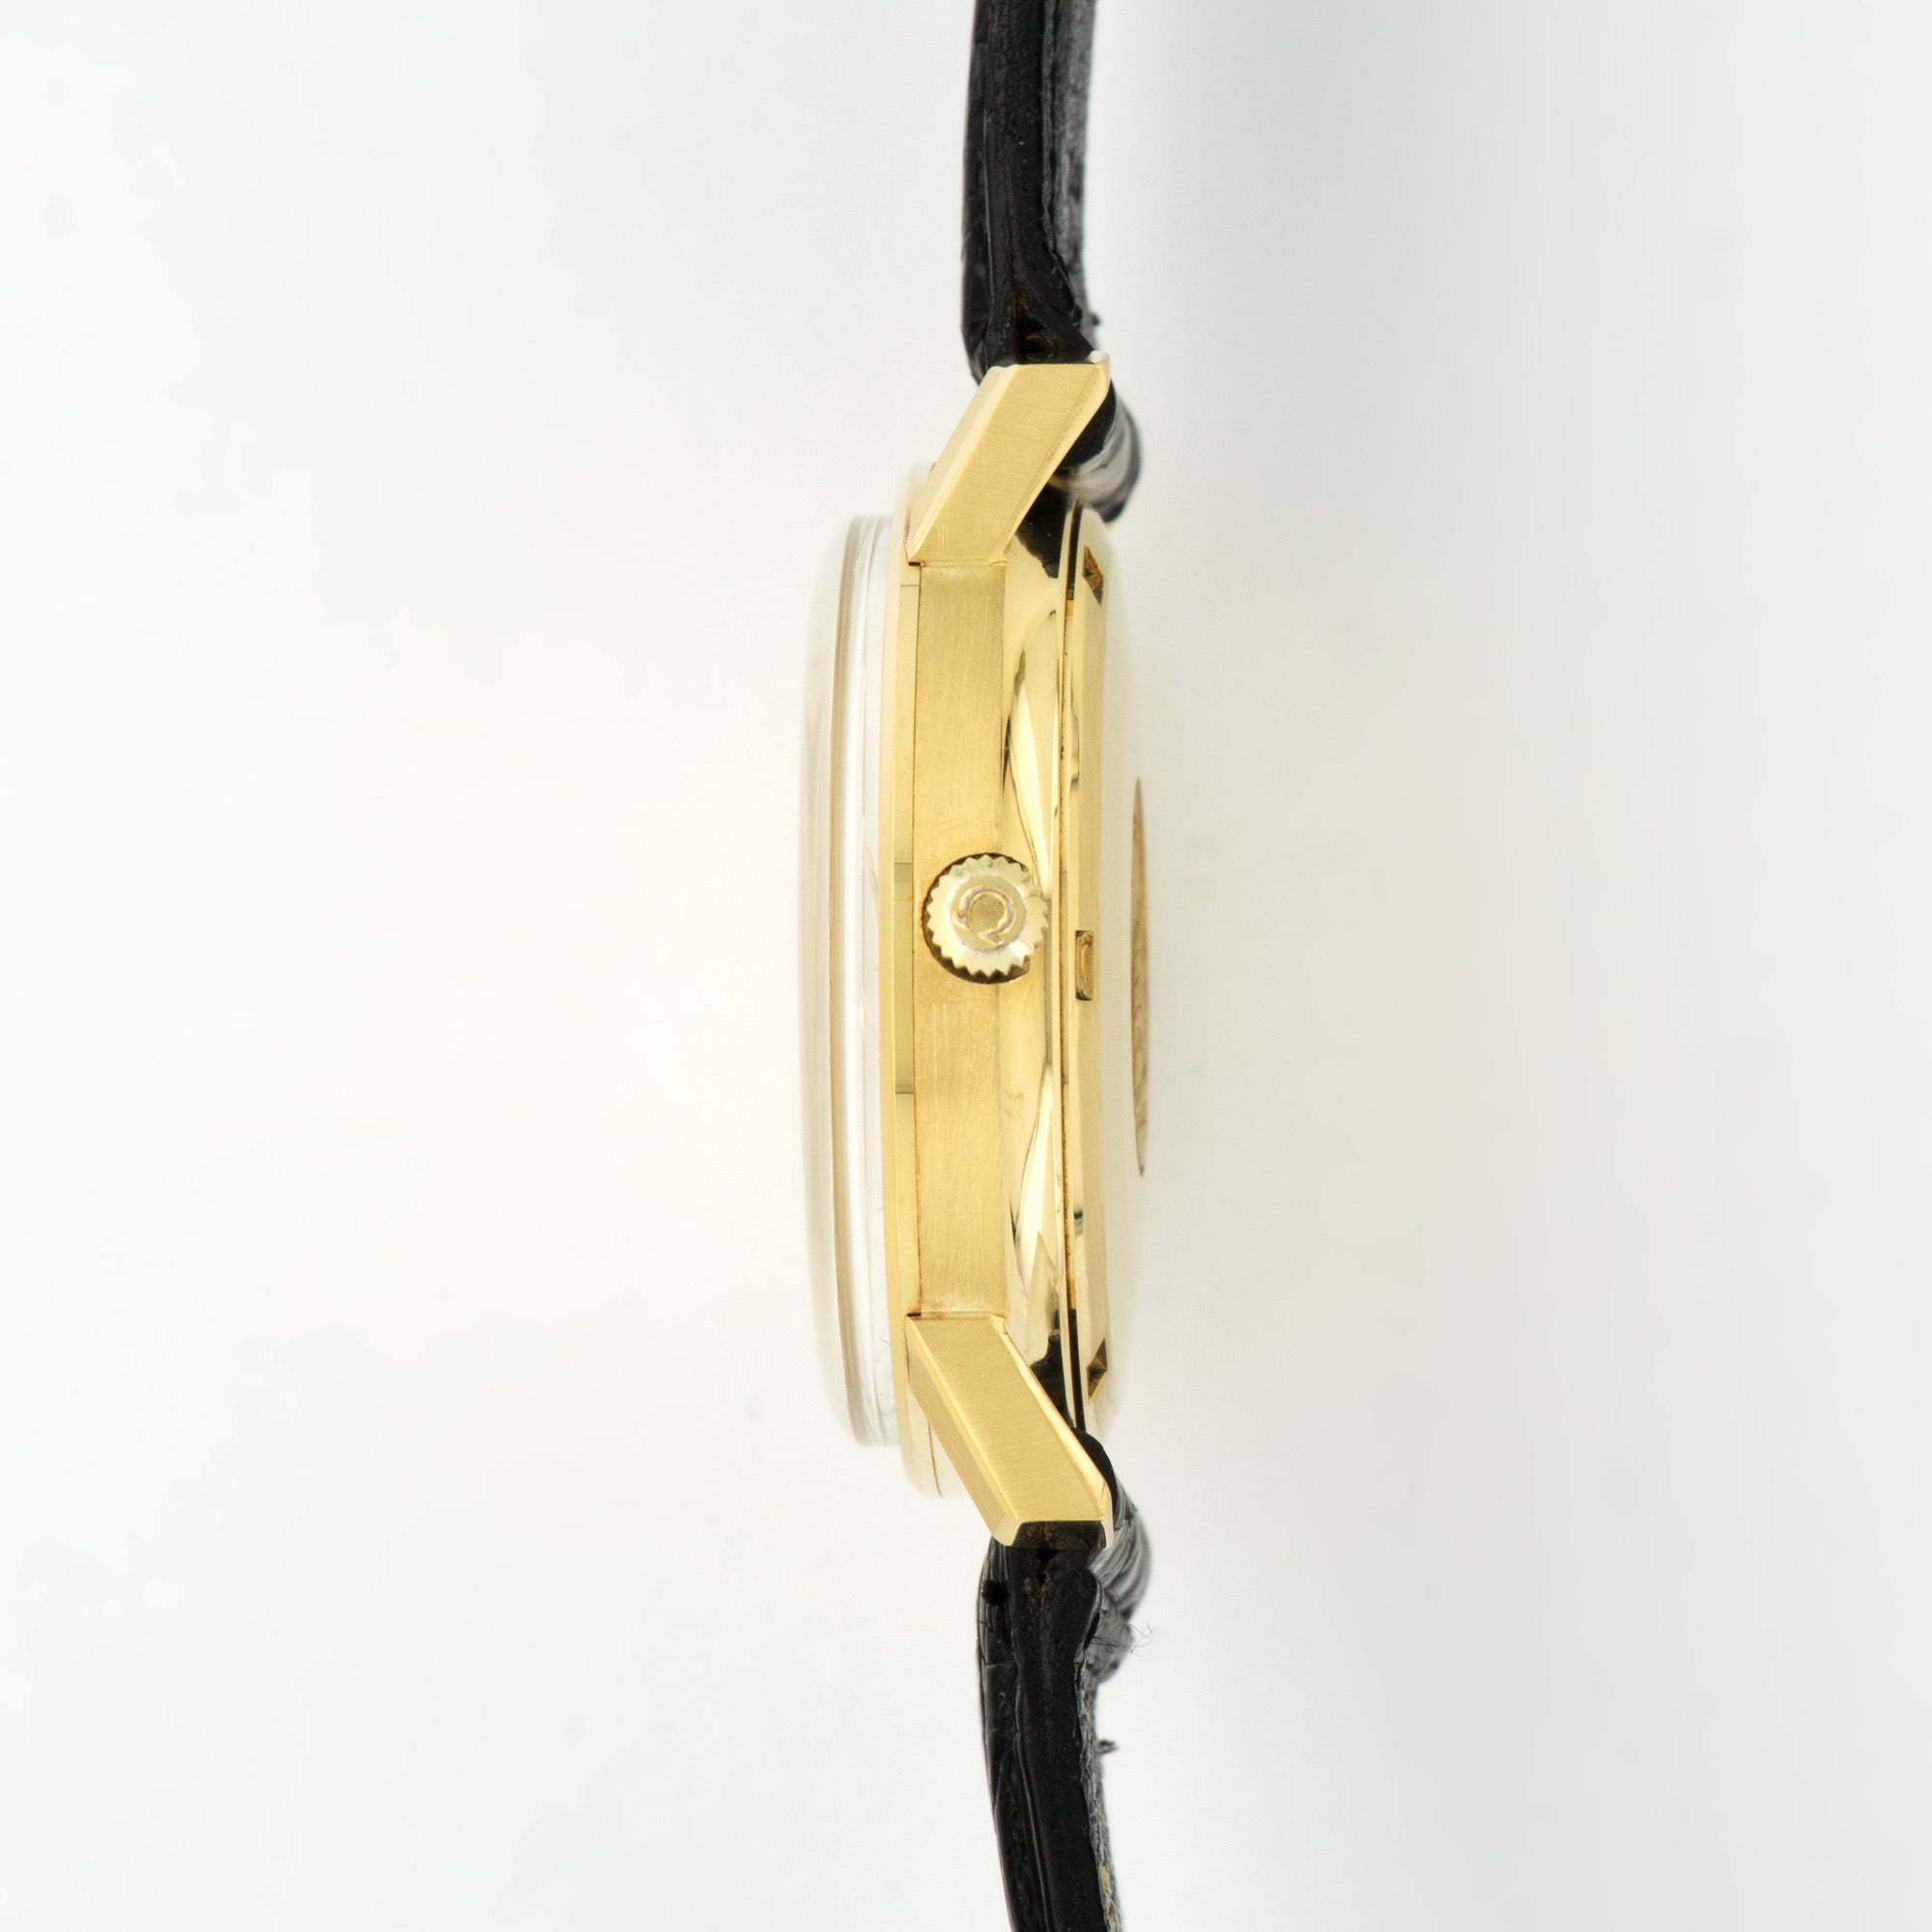 Omega Yellow Gold Constellation Tiffany &amp; Co. Strap Watch